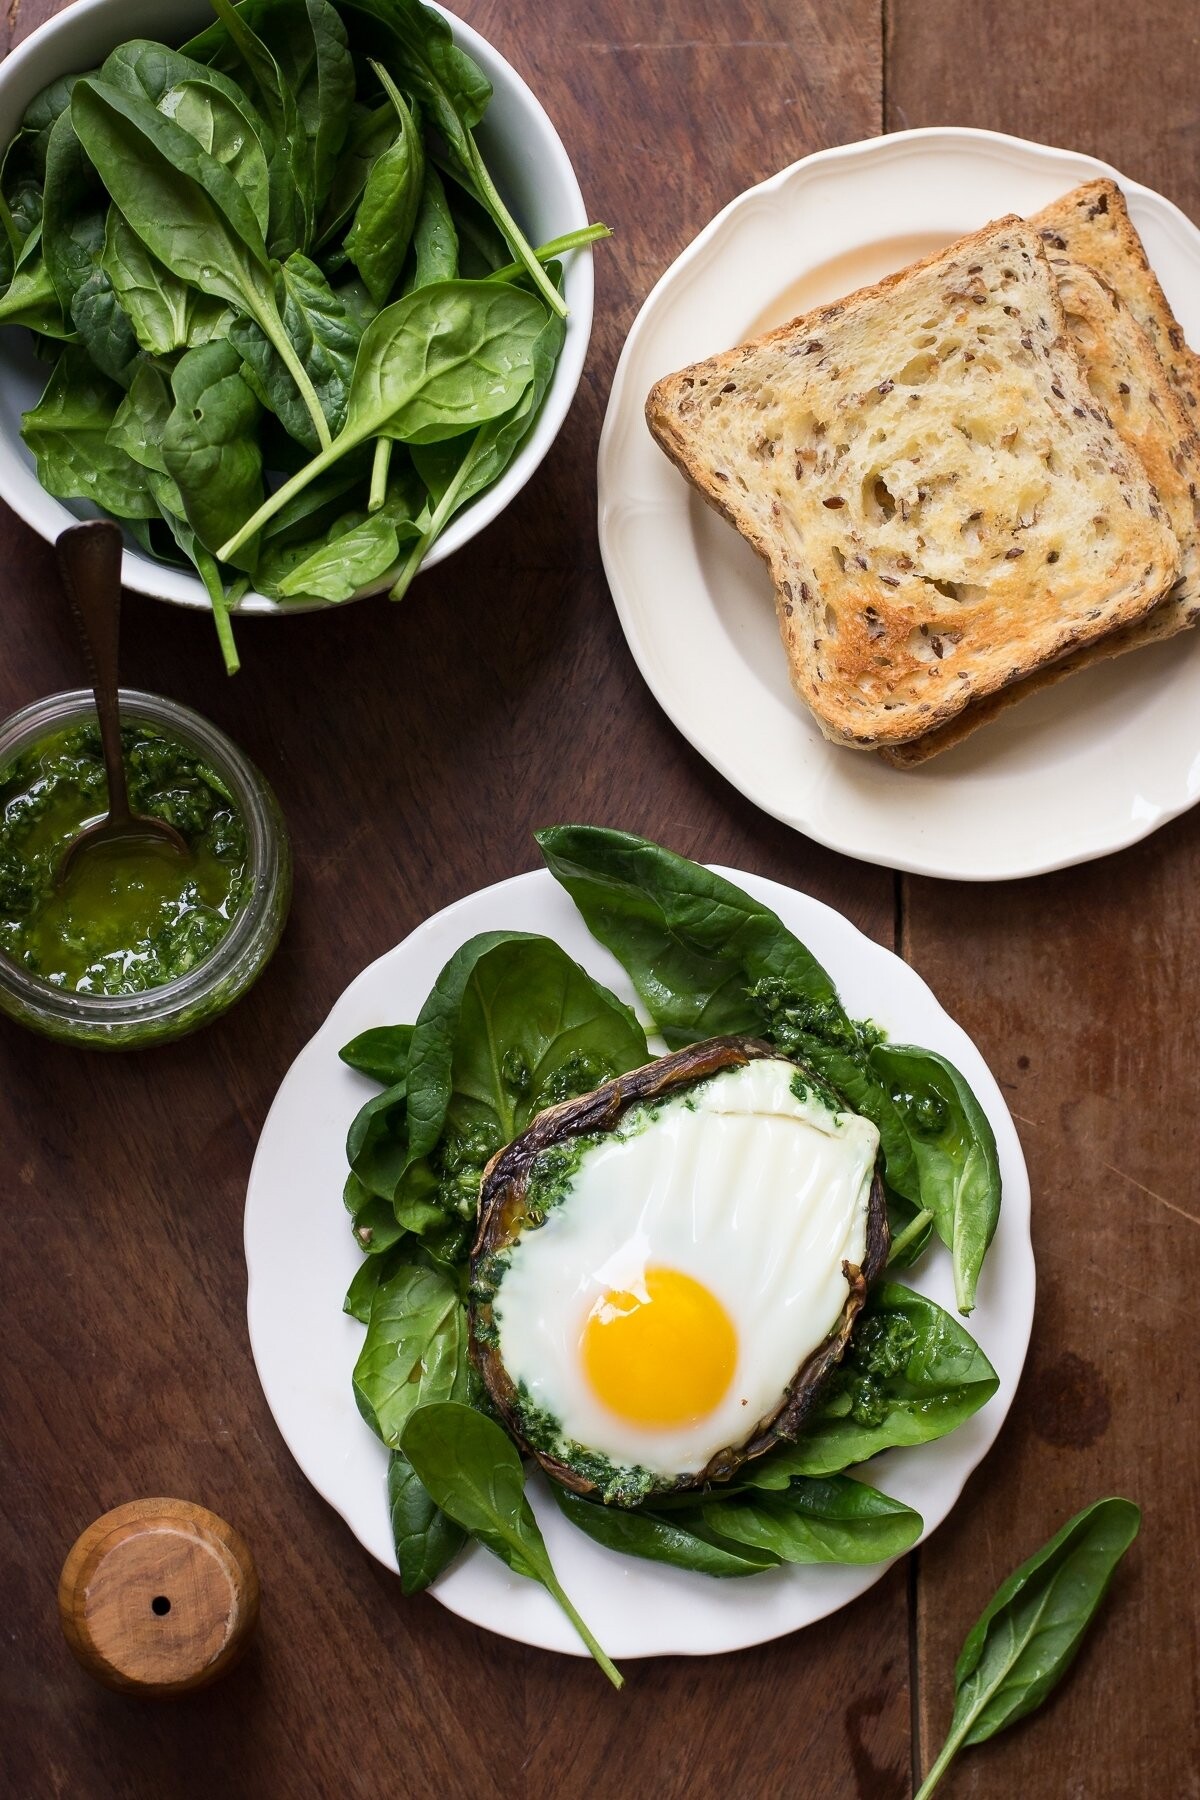 This a photo of a funny breakfast, where a big mushroom is used as an edible cup for an egg. I baked the egg in the mushroom with some parsley garlic sauce and serve on a spinach salad.